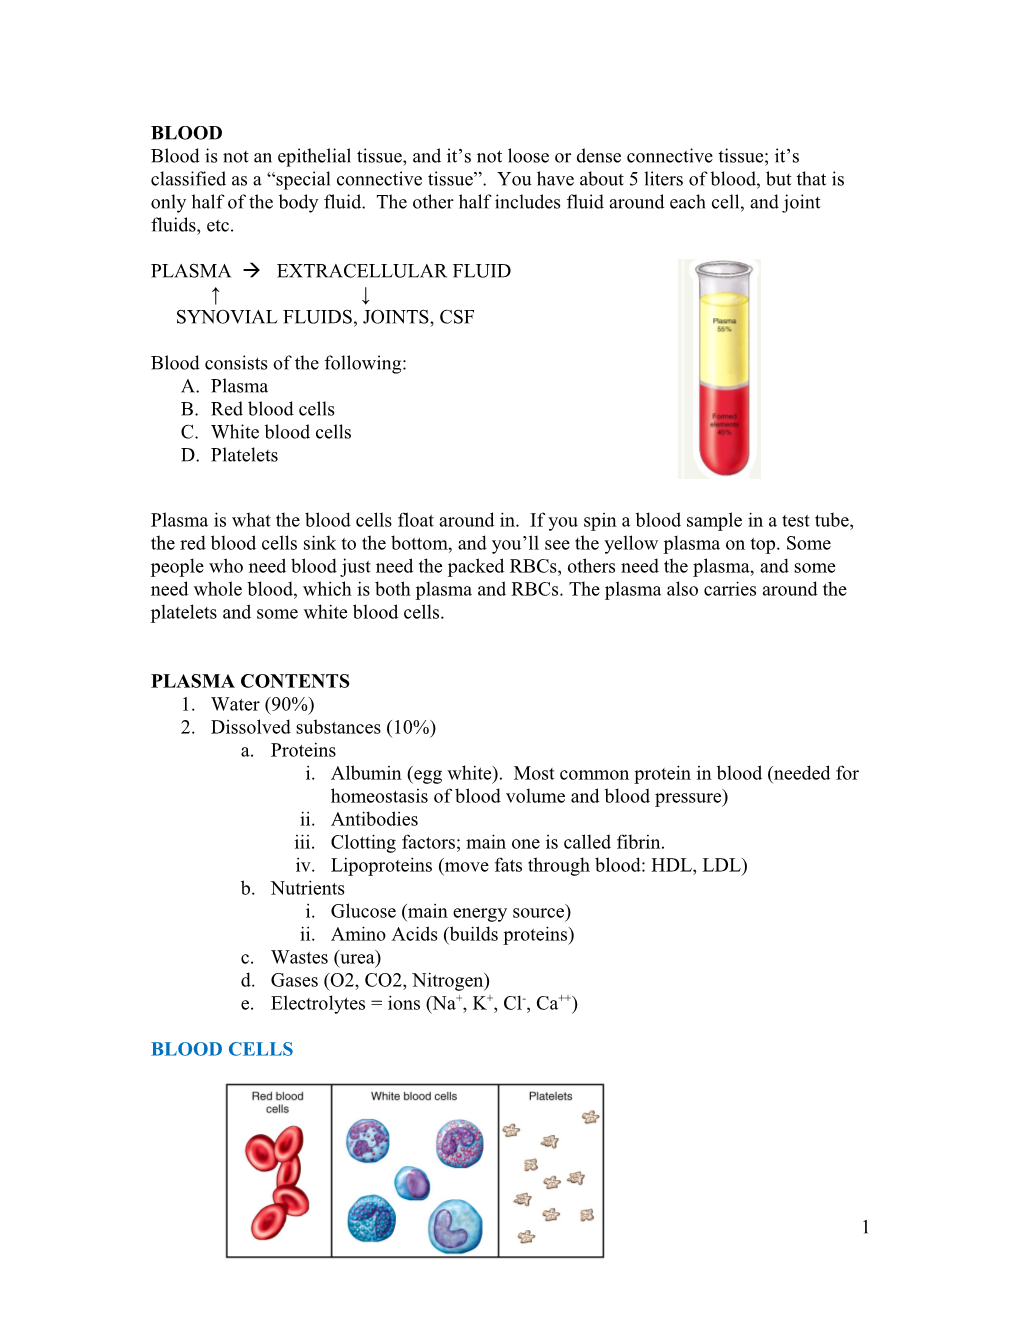 Synovial Fluids, Joints, Csf